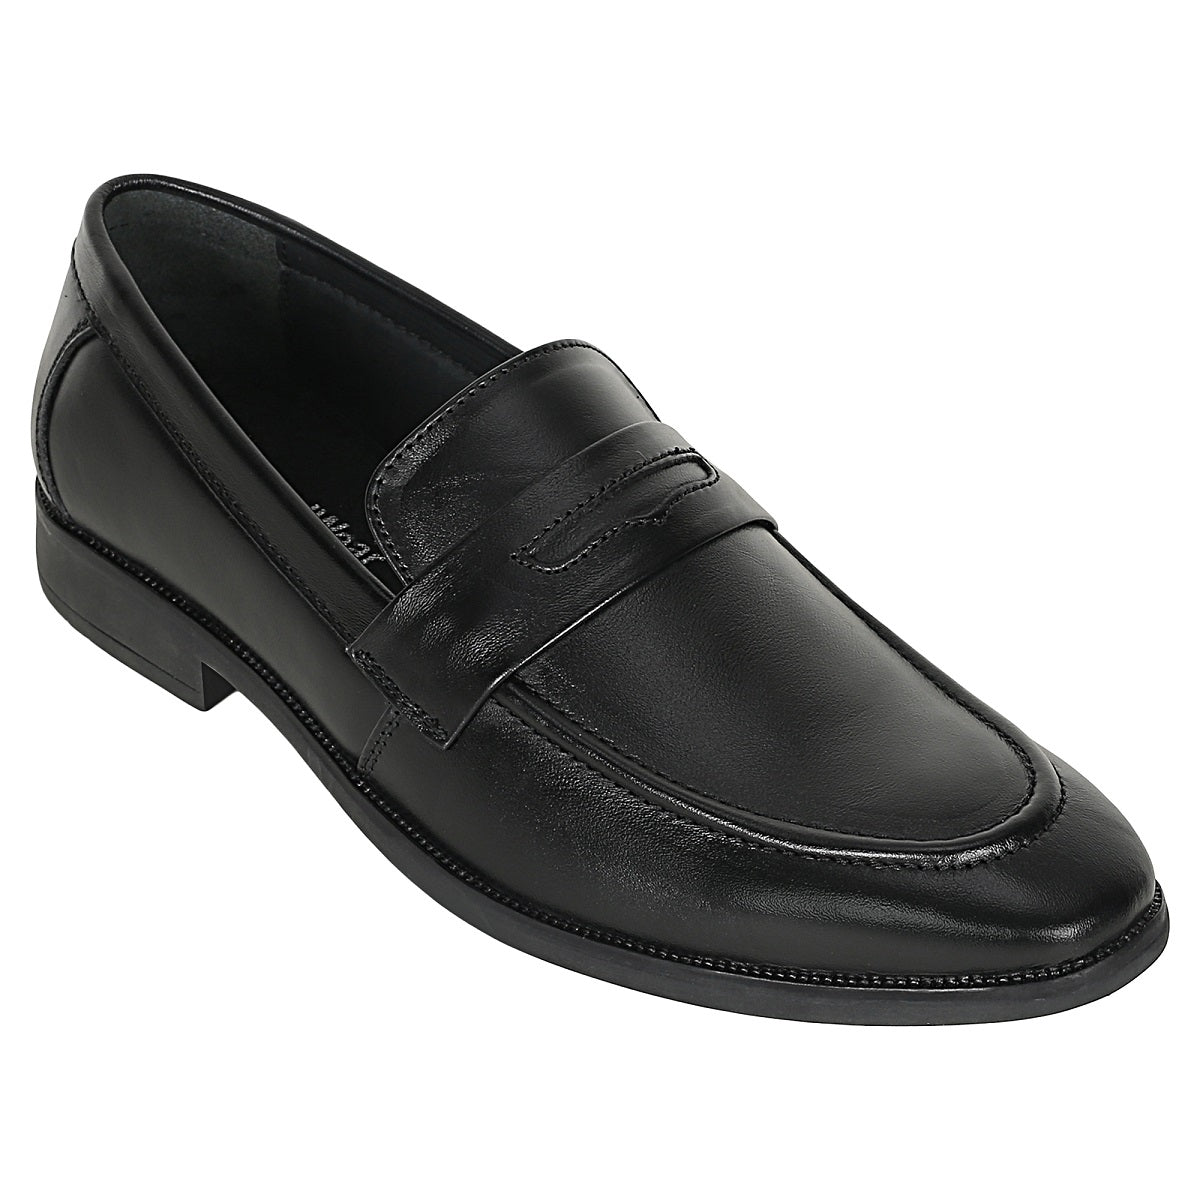 Penny Leather Loafers for Men - Defective